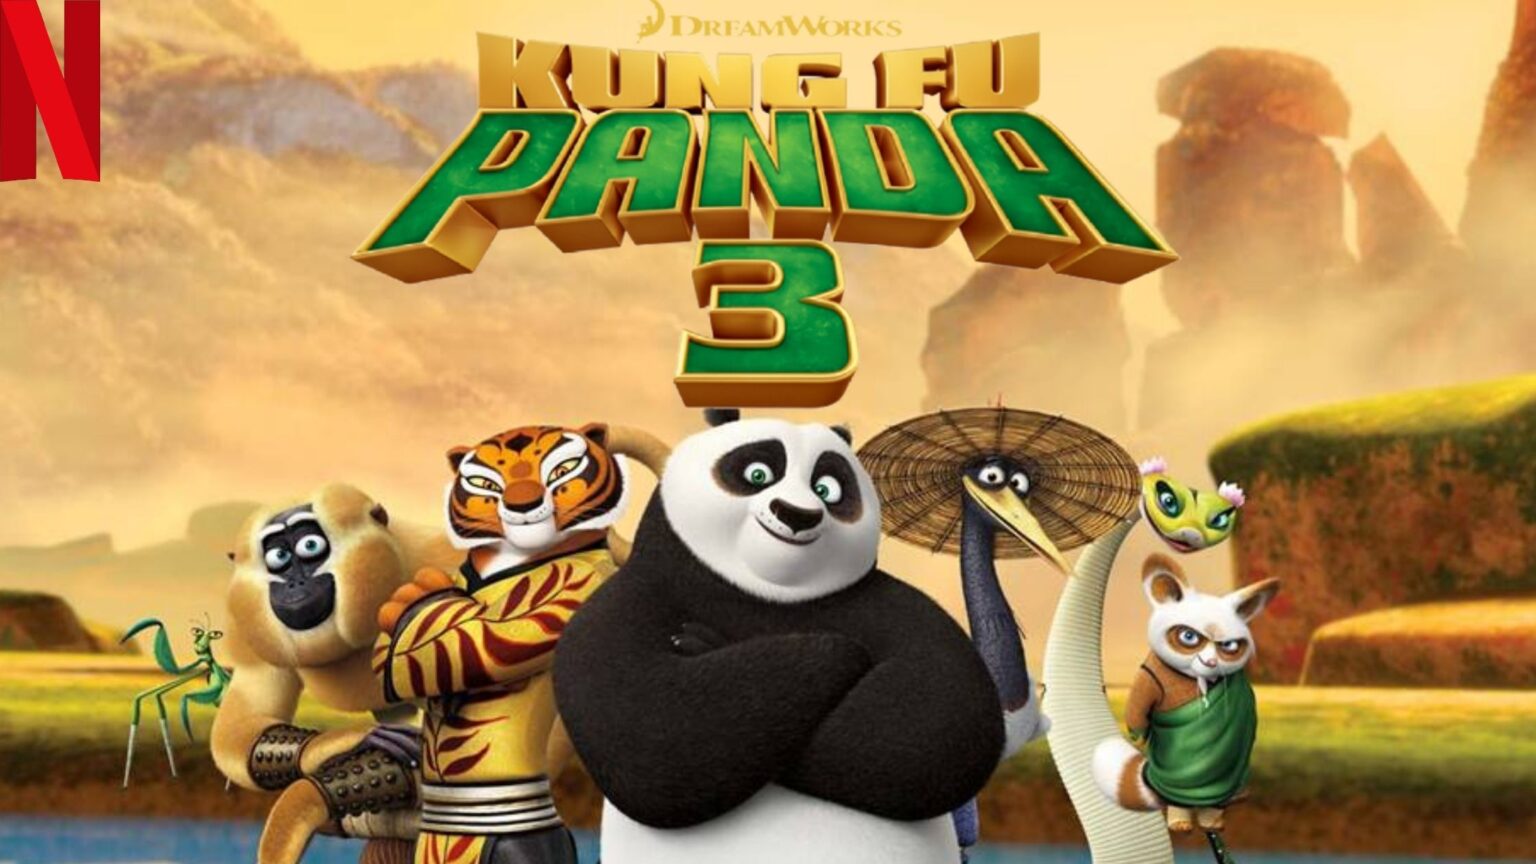 Kung Fu Panda 3 (2016) Watch it on NetFlix From Anywhere in the World